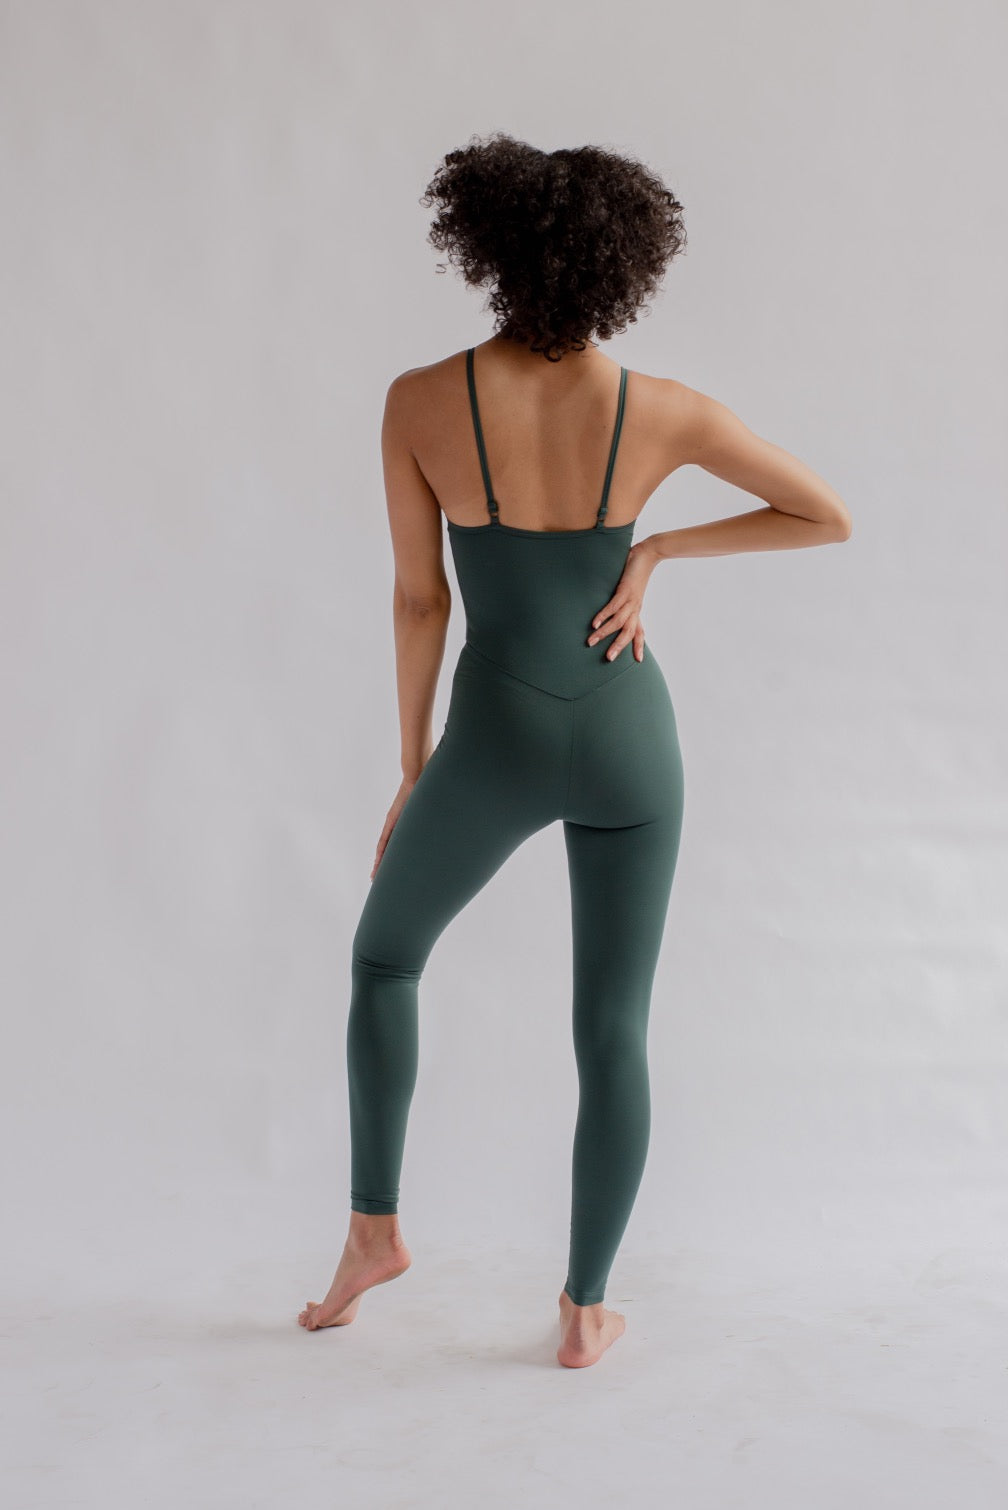 Girlfriend Collective - Training & Yoga Unitard - Made from recycled plastic bottles - Weekendbee - sustainable sportswear